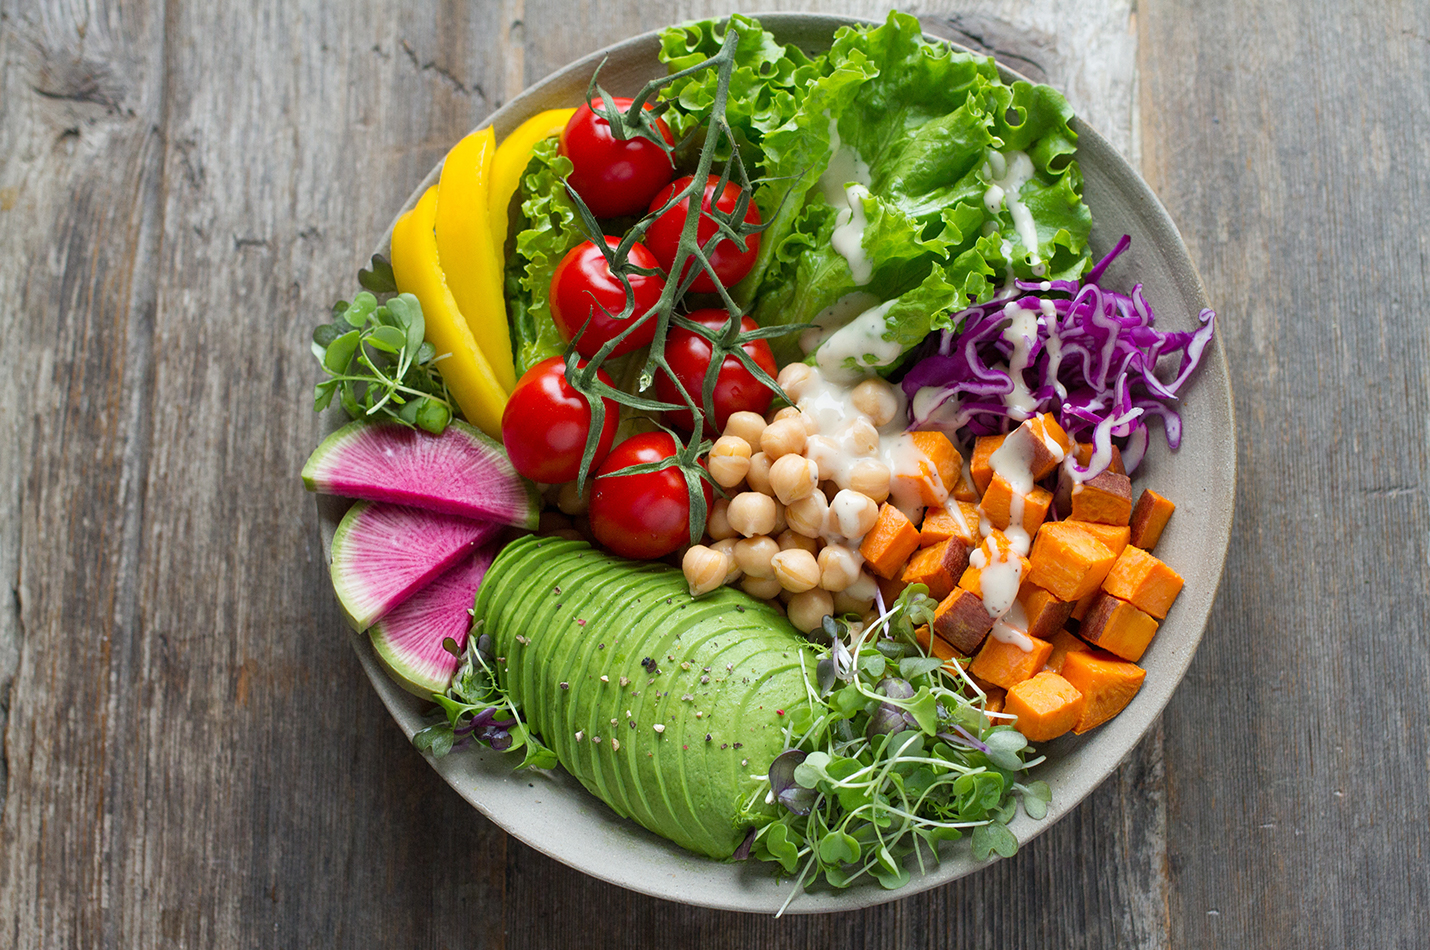 plant-based diet image of salad with chickpeas and avocado